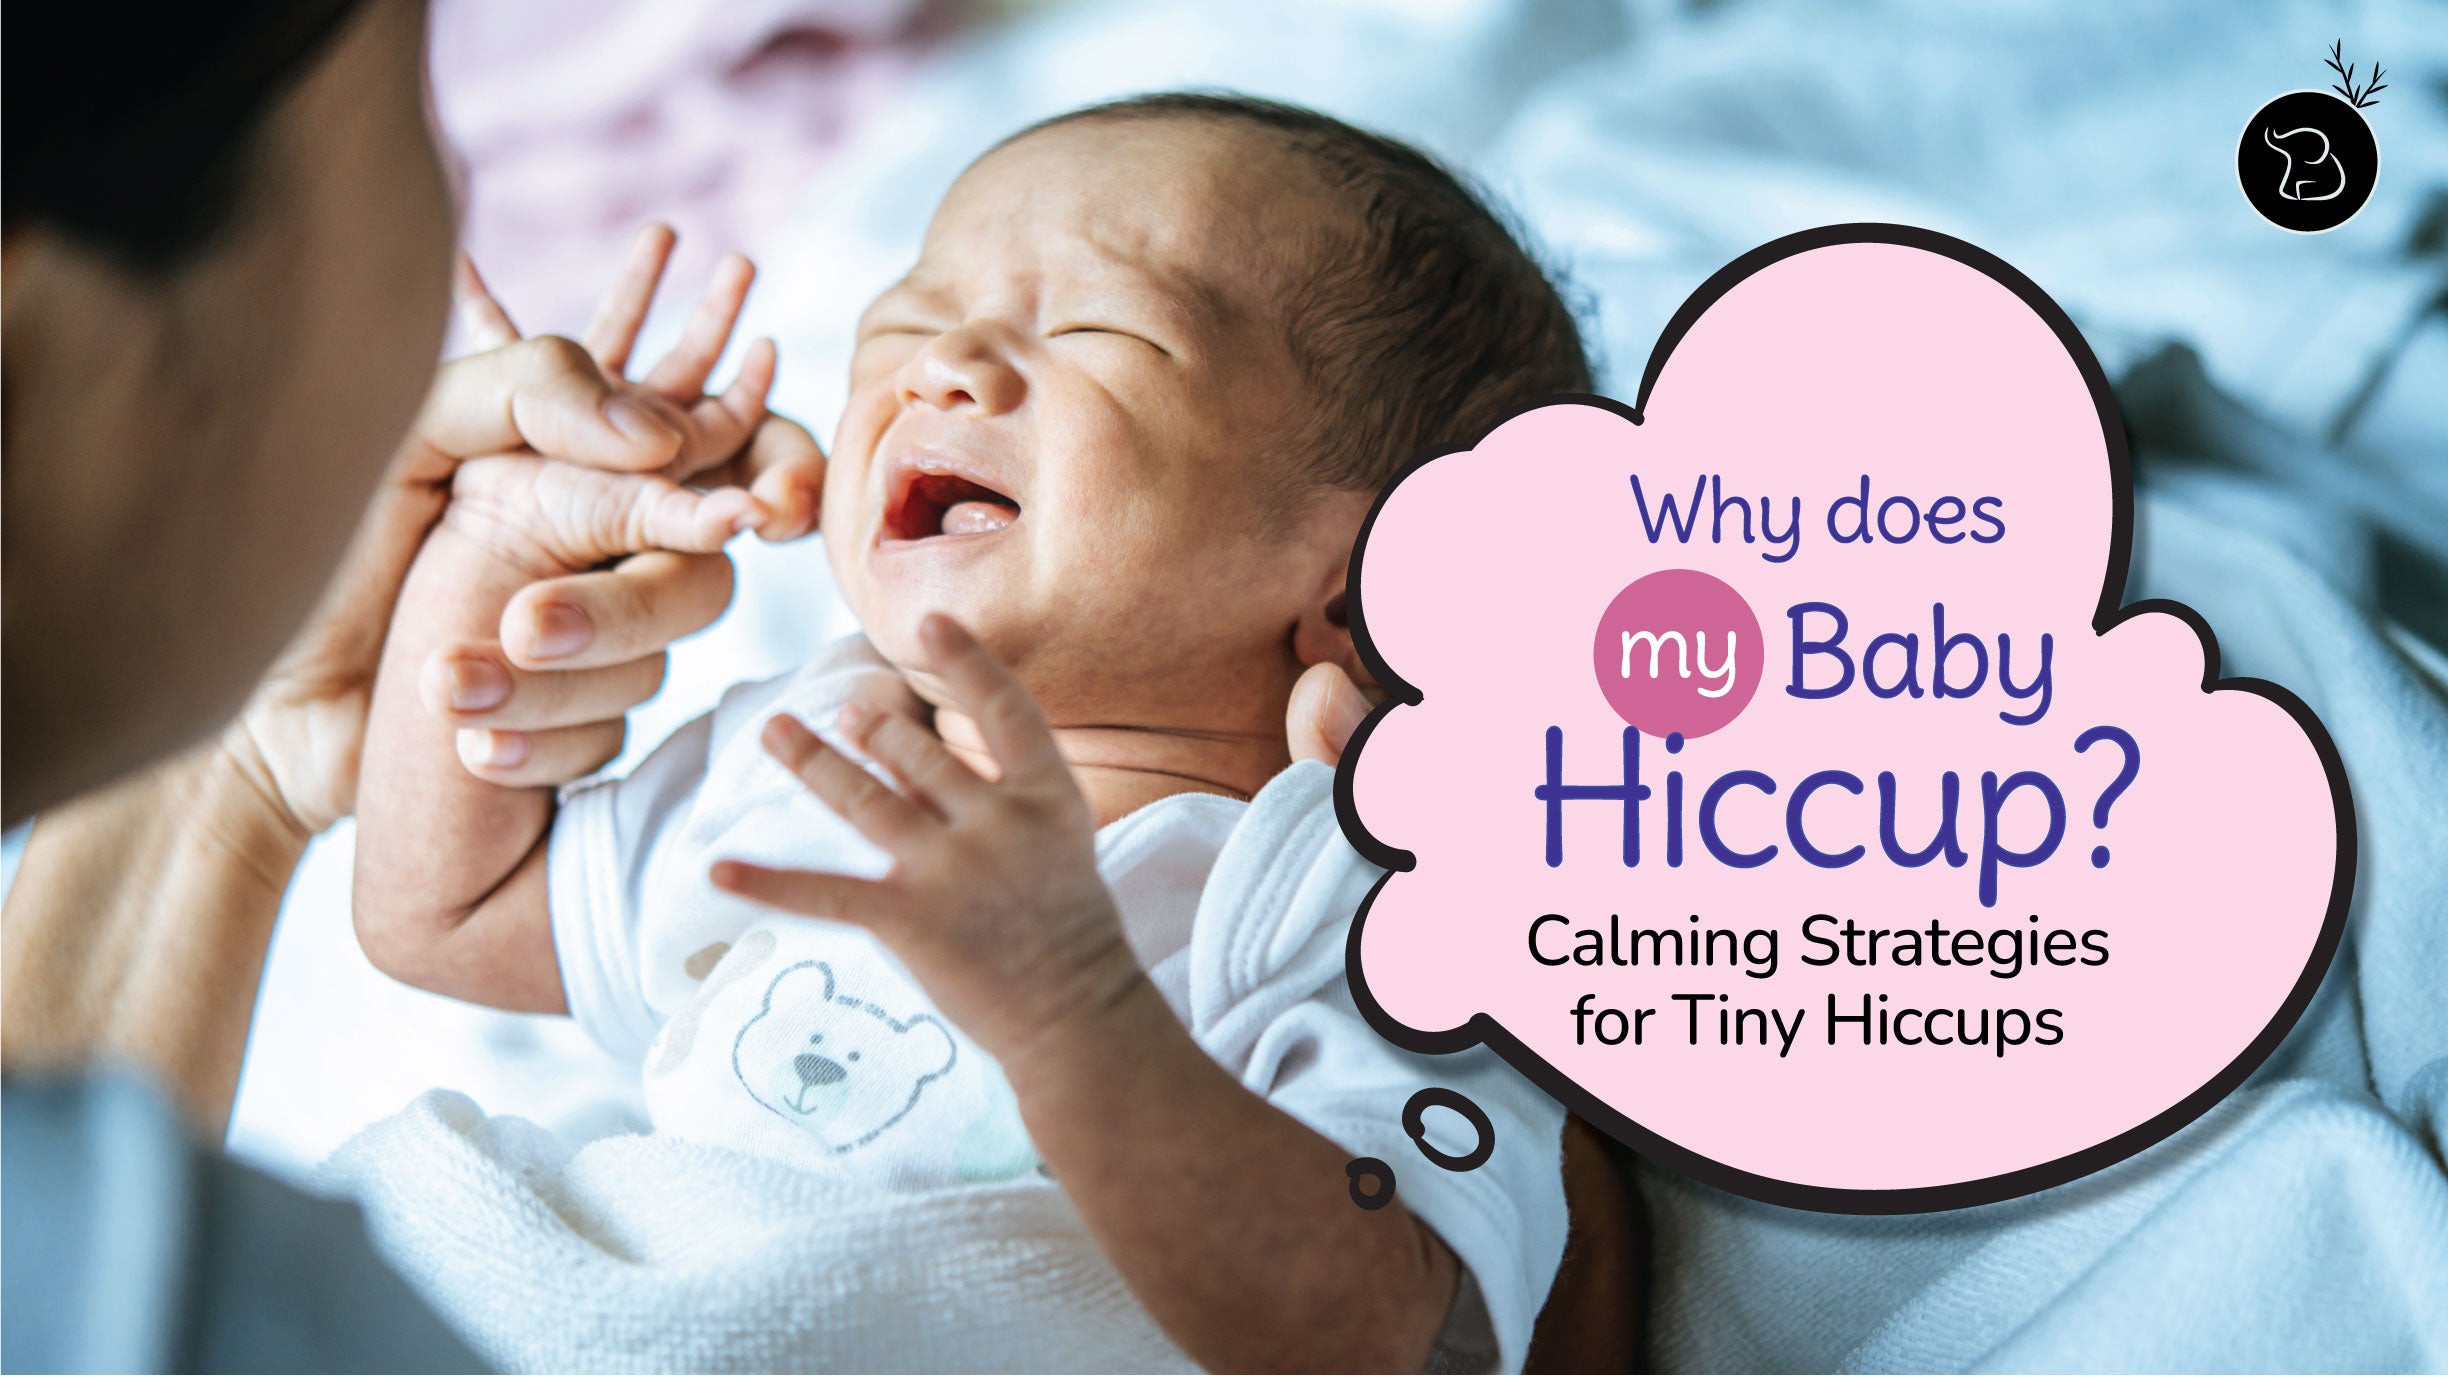 Why Does My Baby Hiccup?